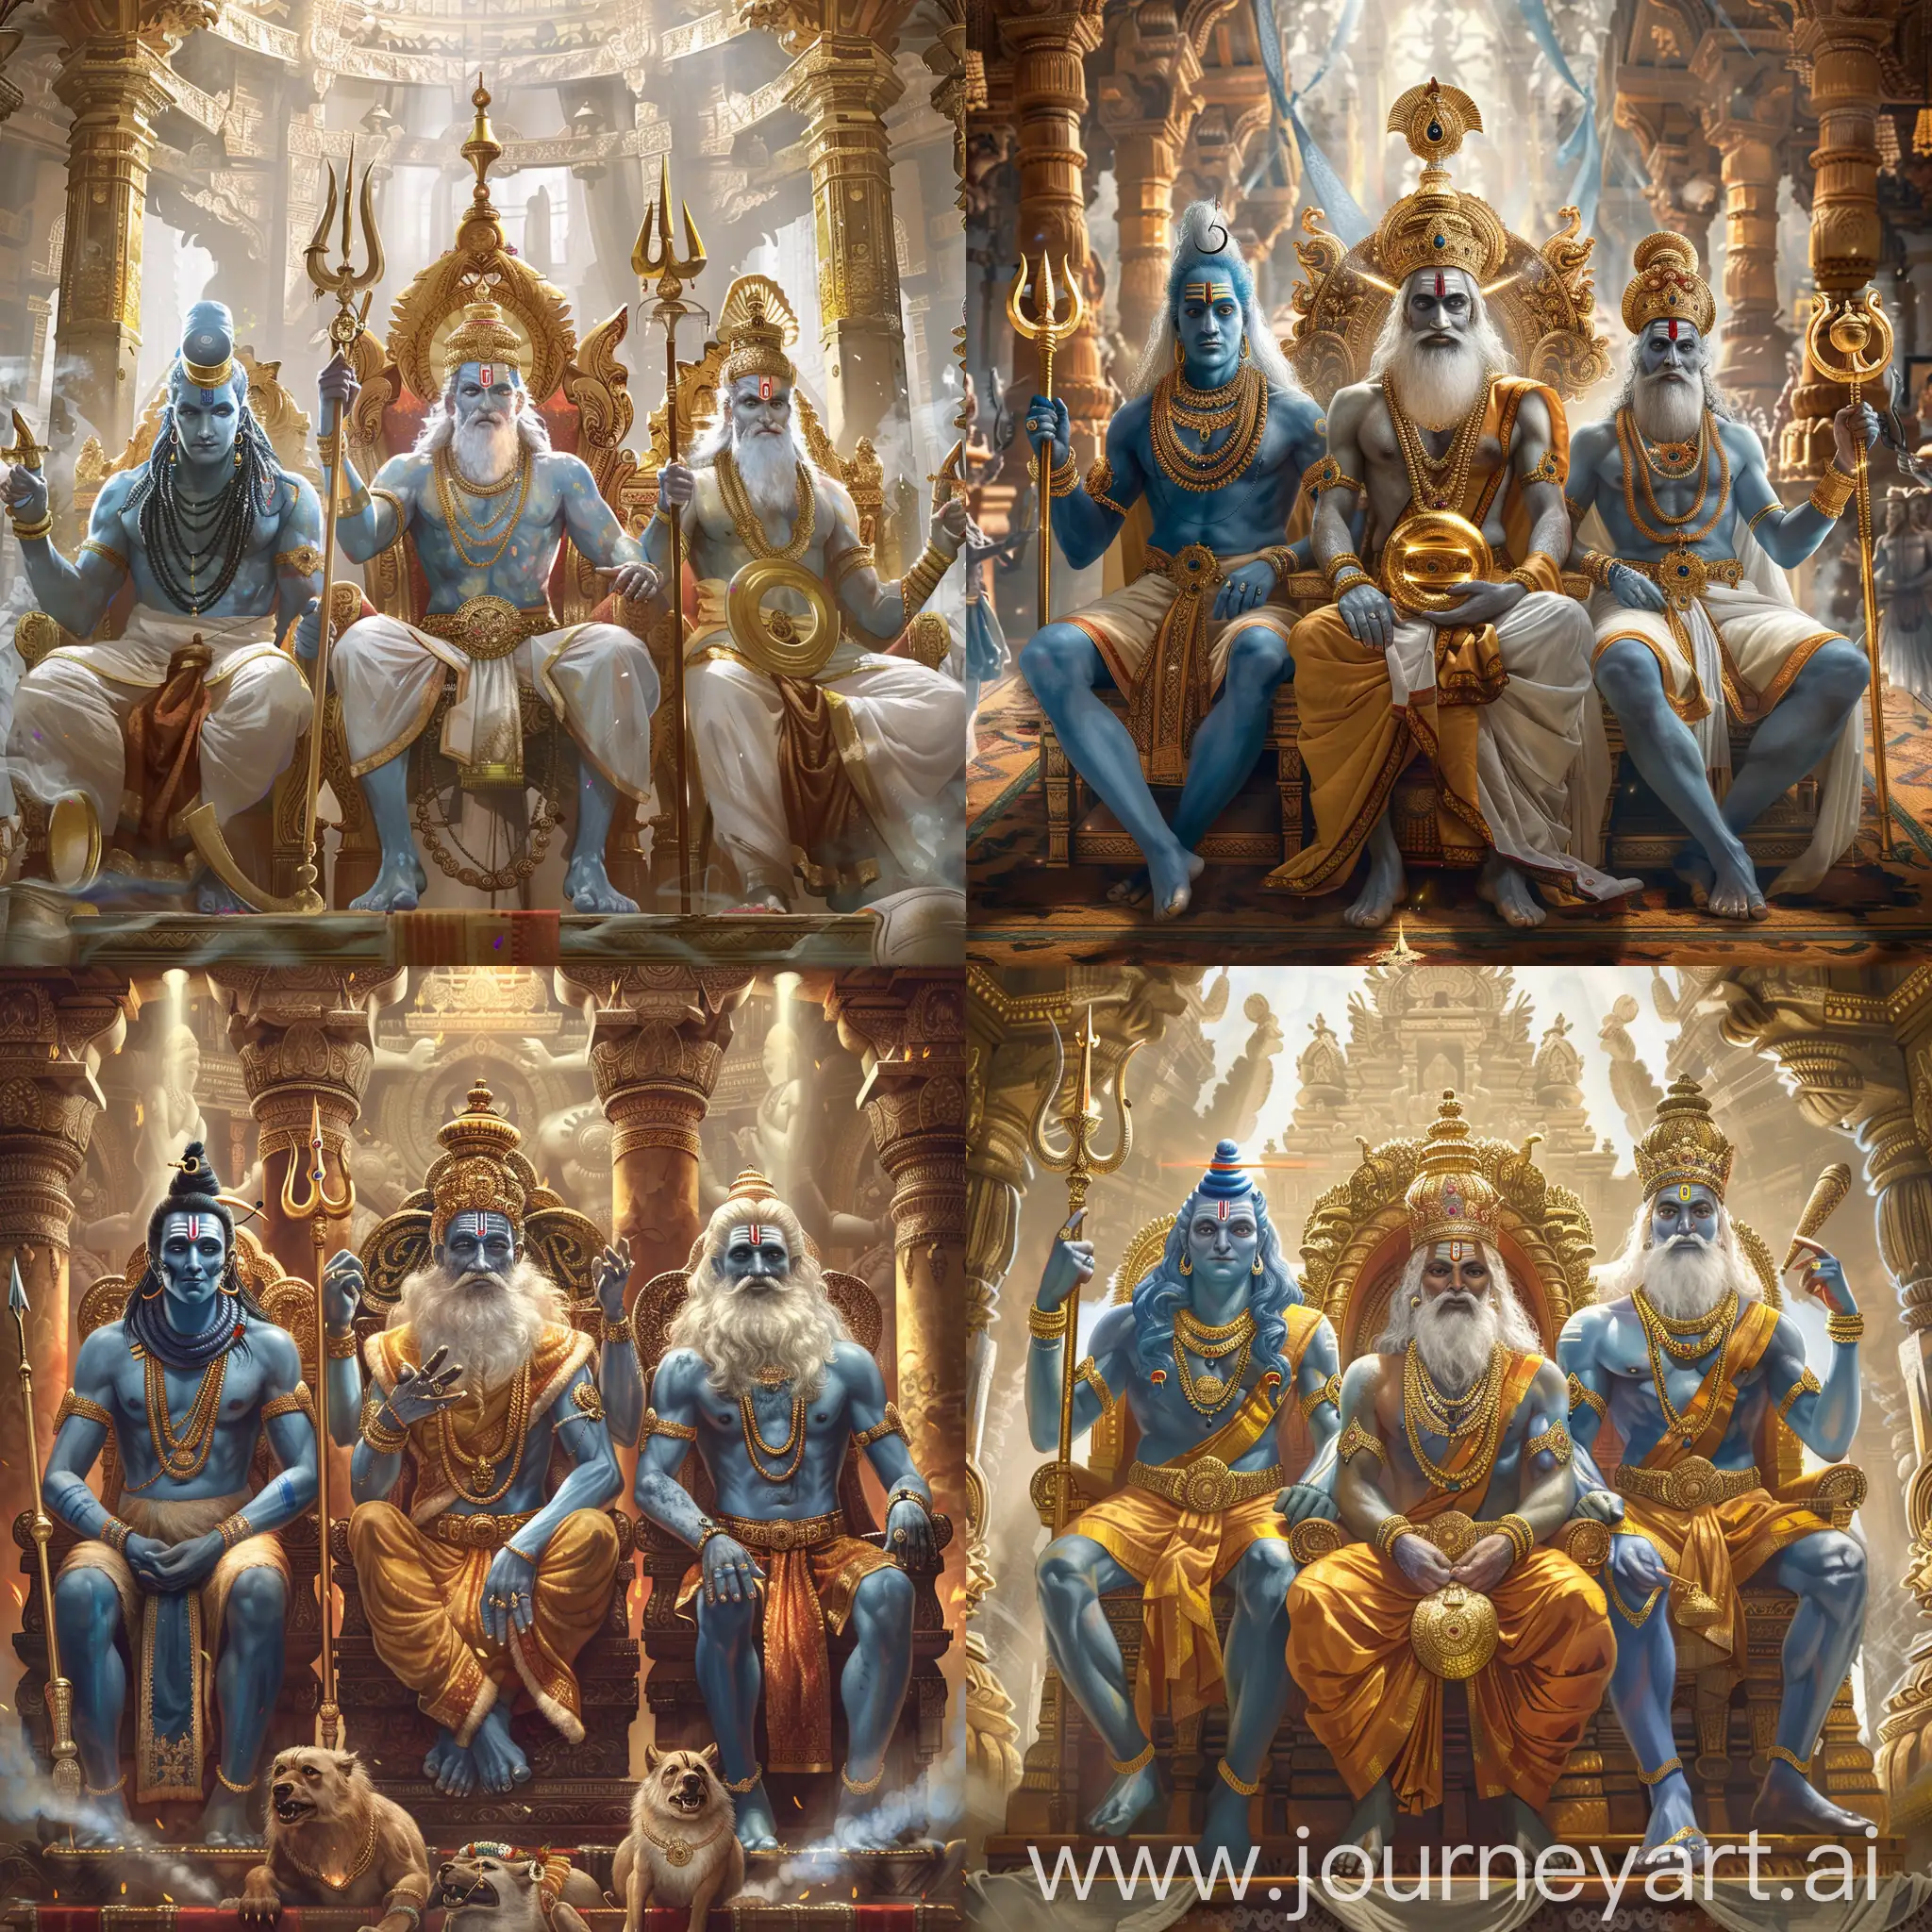 three Hindu gods are sitting on their thrones,

Shiva is the left one is with blue skin and holds a golden trident in hands,

Brahma is the center one with three faces, white beards, pale skin and golden royal crown,

Vishnu is the right one with blue skin and holds a golden round mace in hands,

they are all inside a splendid Hindu temple,